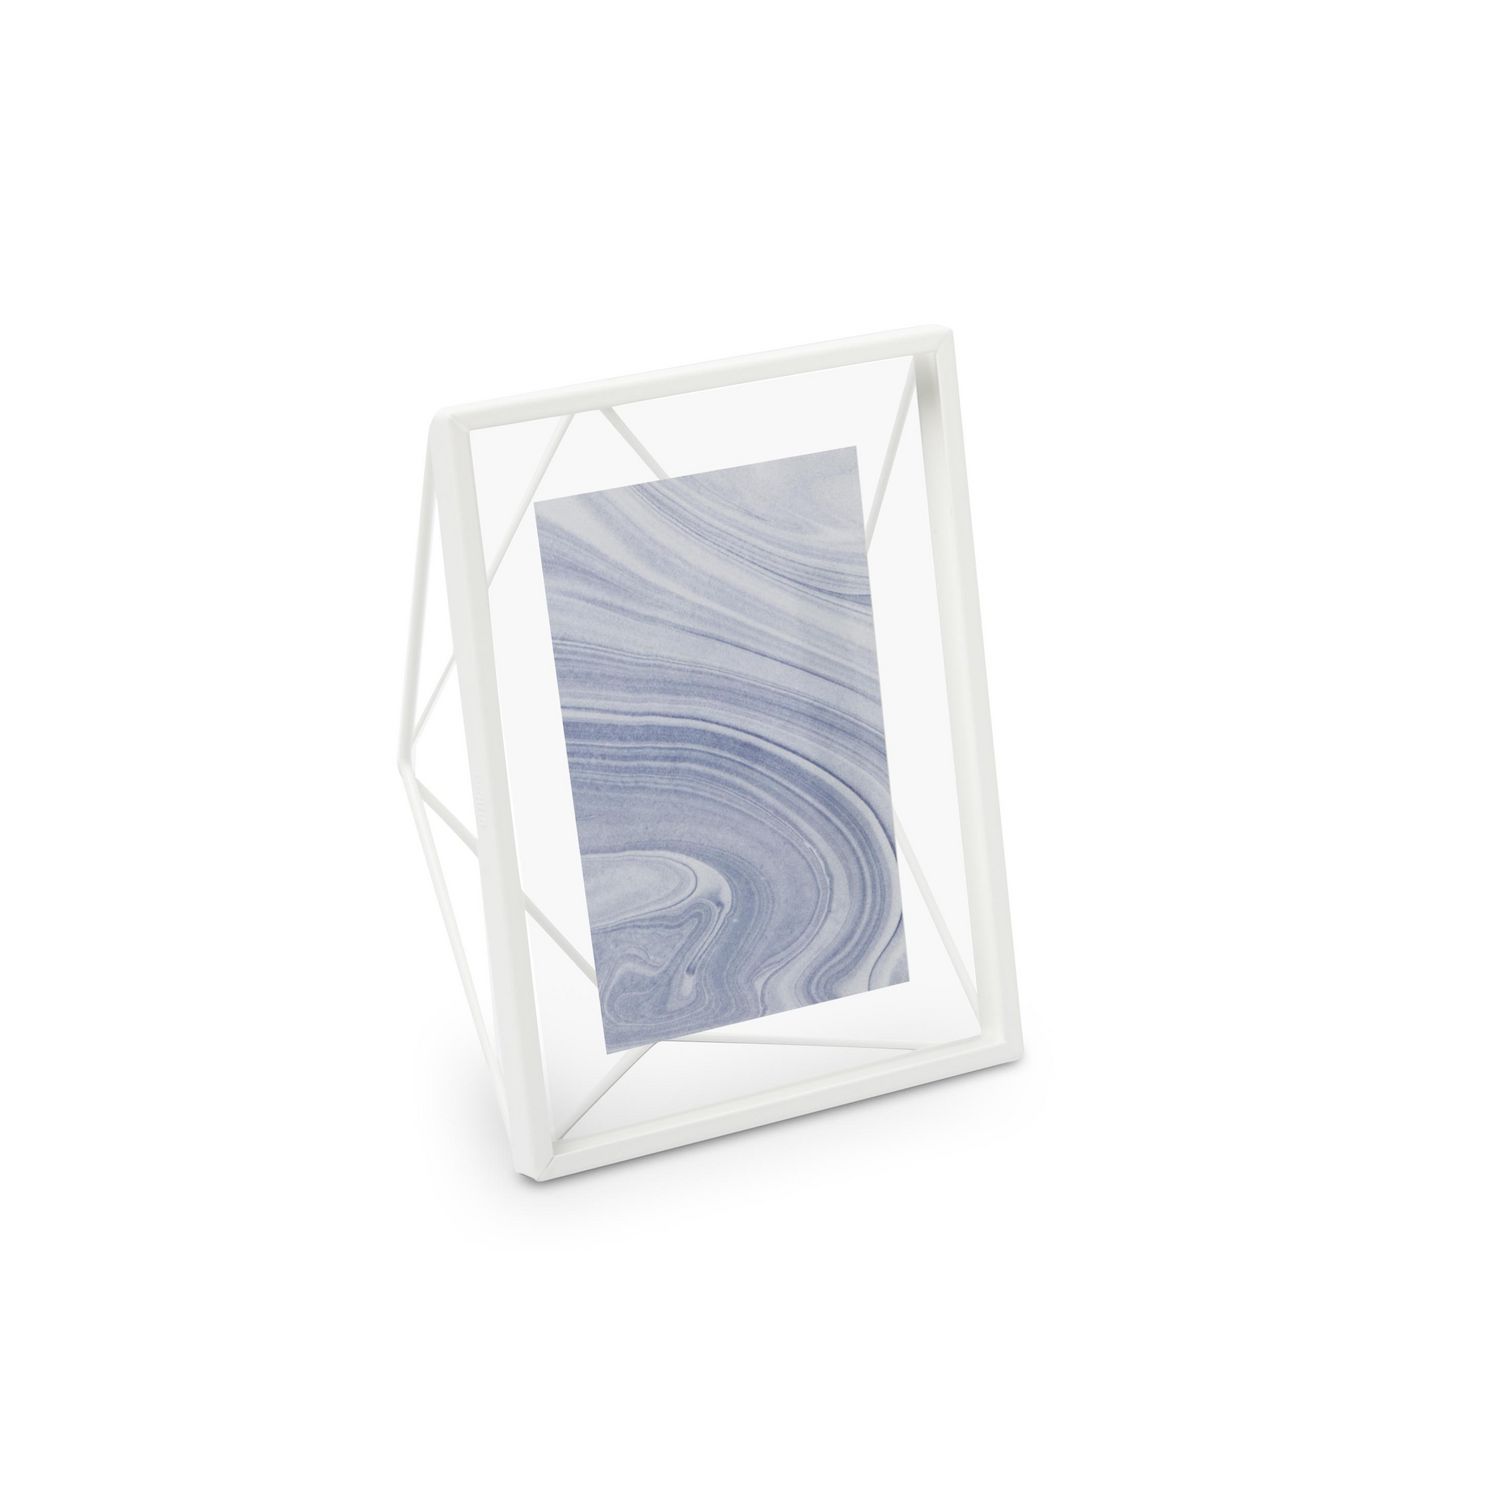 White Prisma 4x6 Picture Frame for Desktop or Wall 4 by 6-Inch Umbra Holds One 4/”x6/” Photo